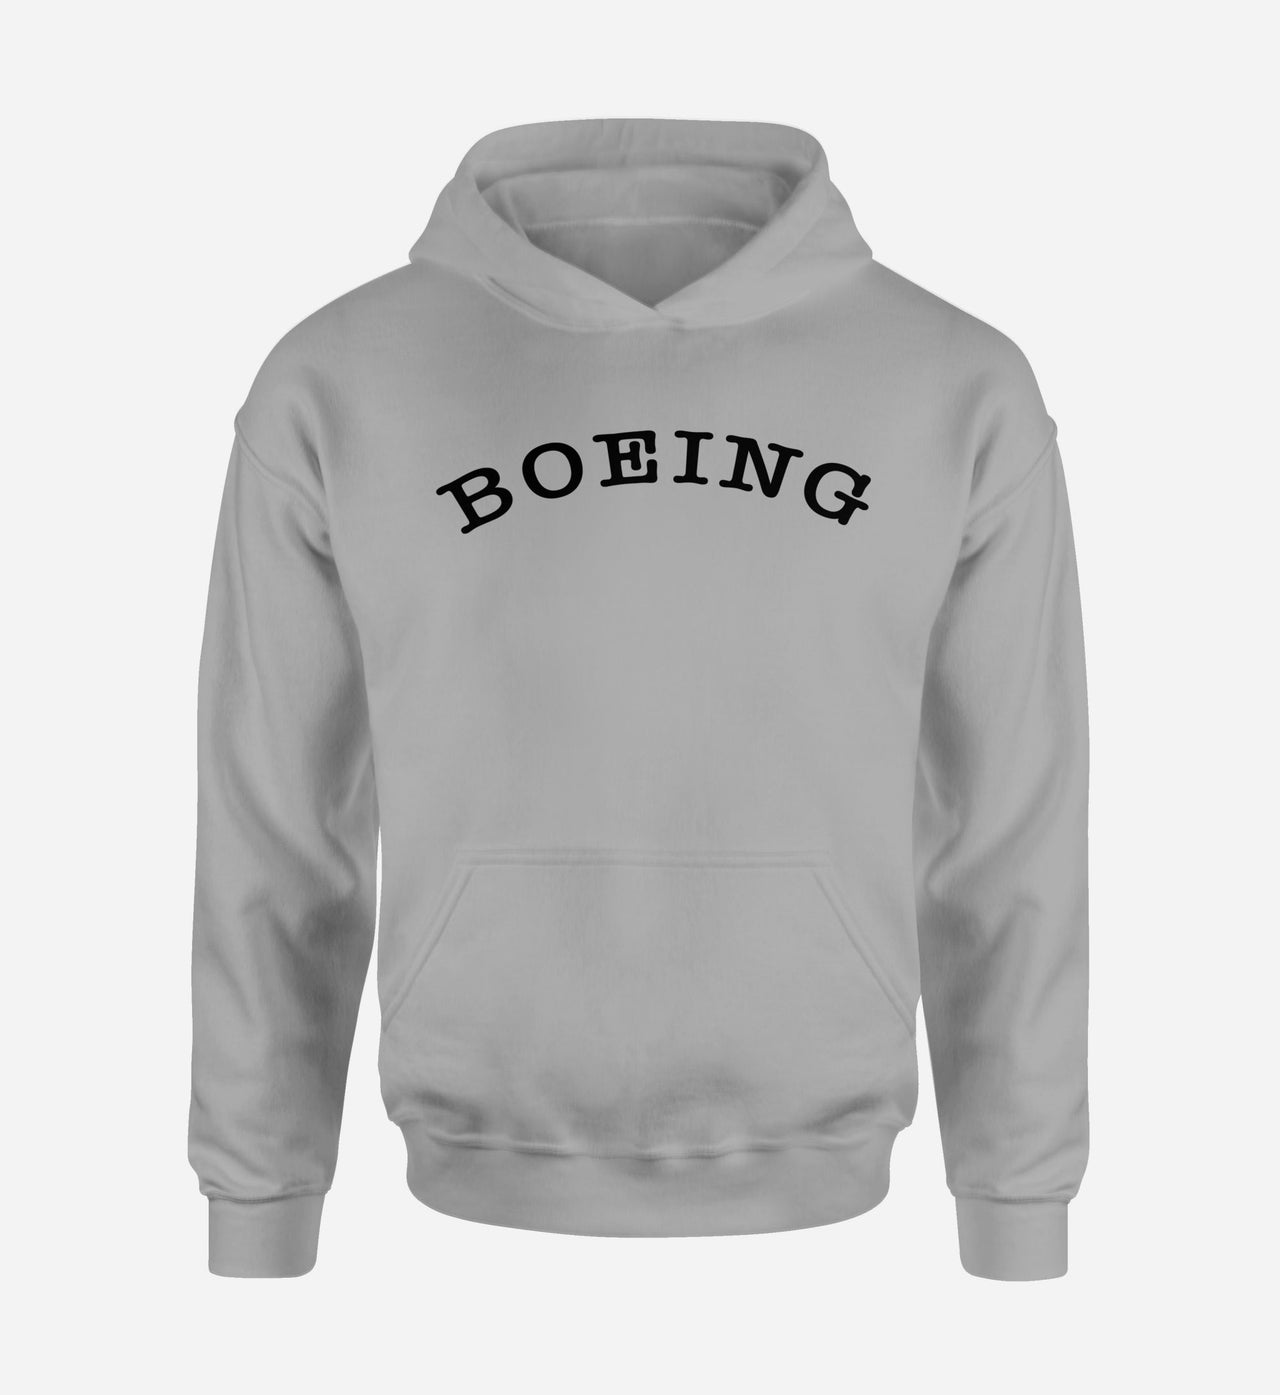 Special BOEING Text Designed Hoodies